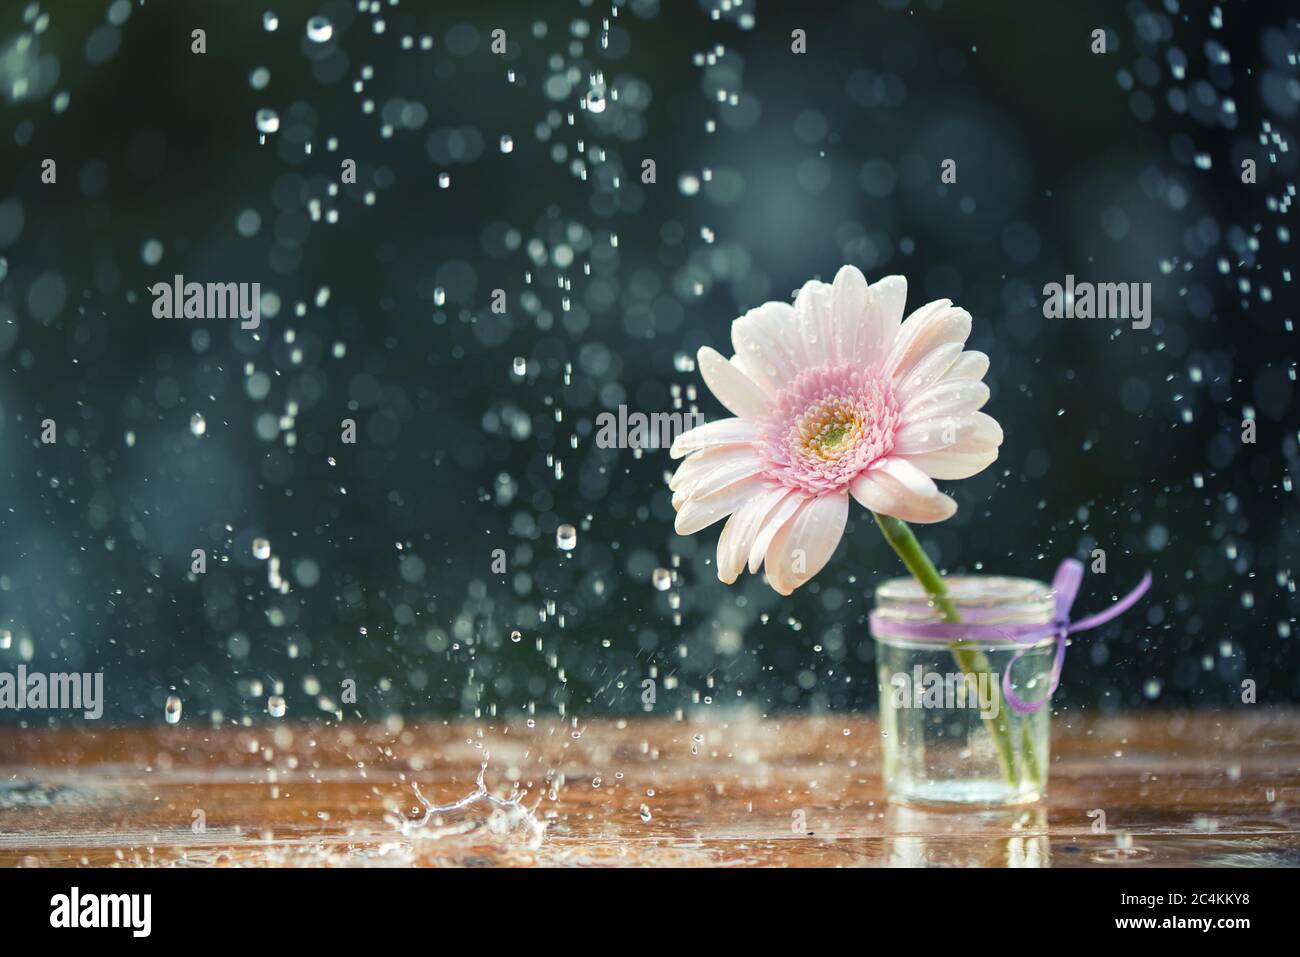 Pink Gerbera daisy flower in vase under the rain on wooden table outdoors, vintage filter Stock Photo